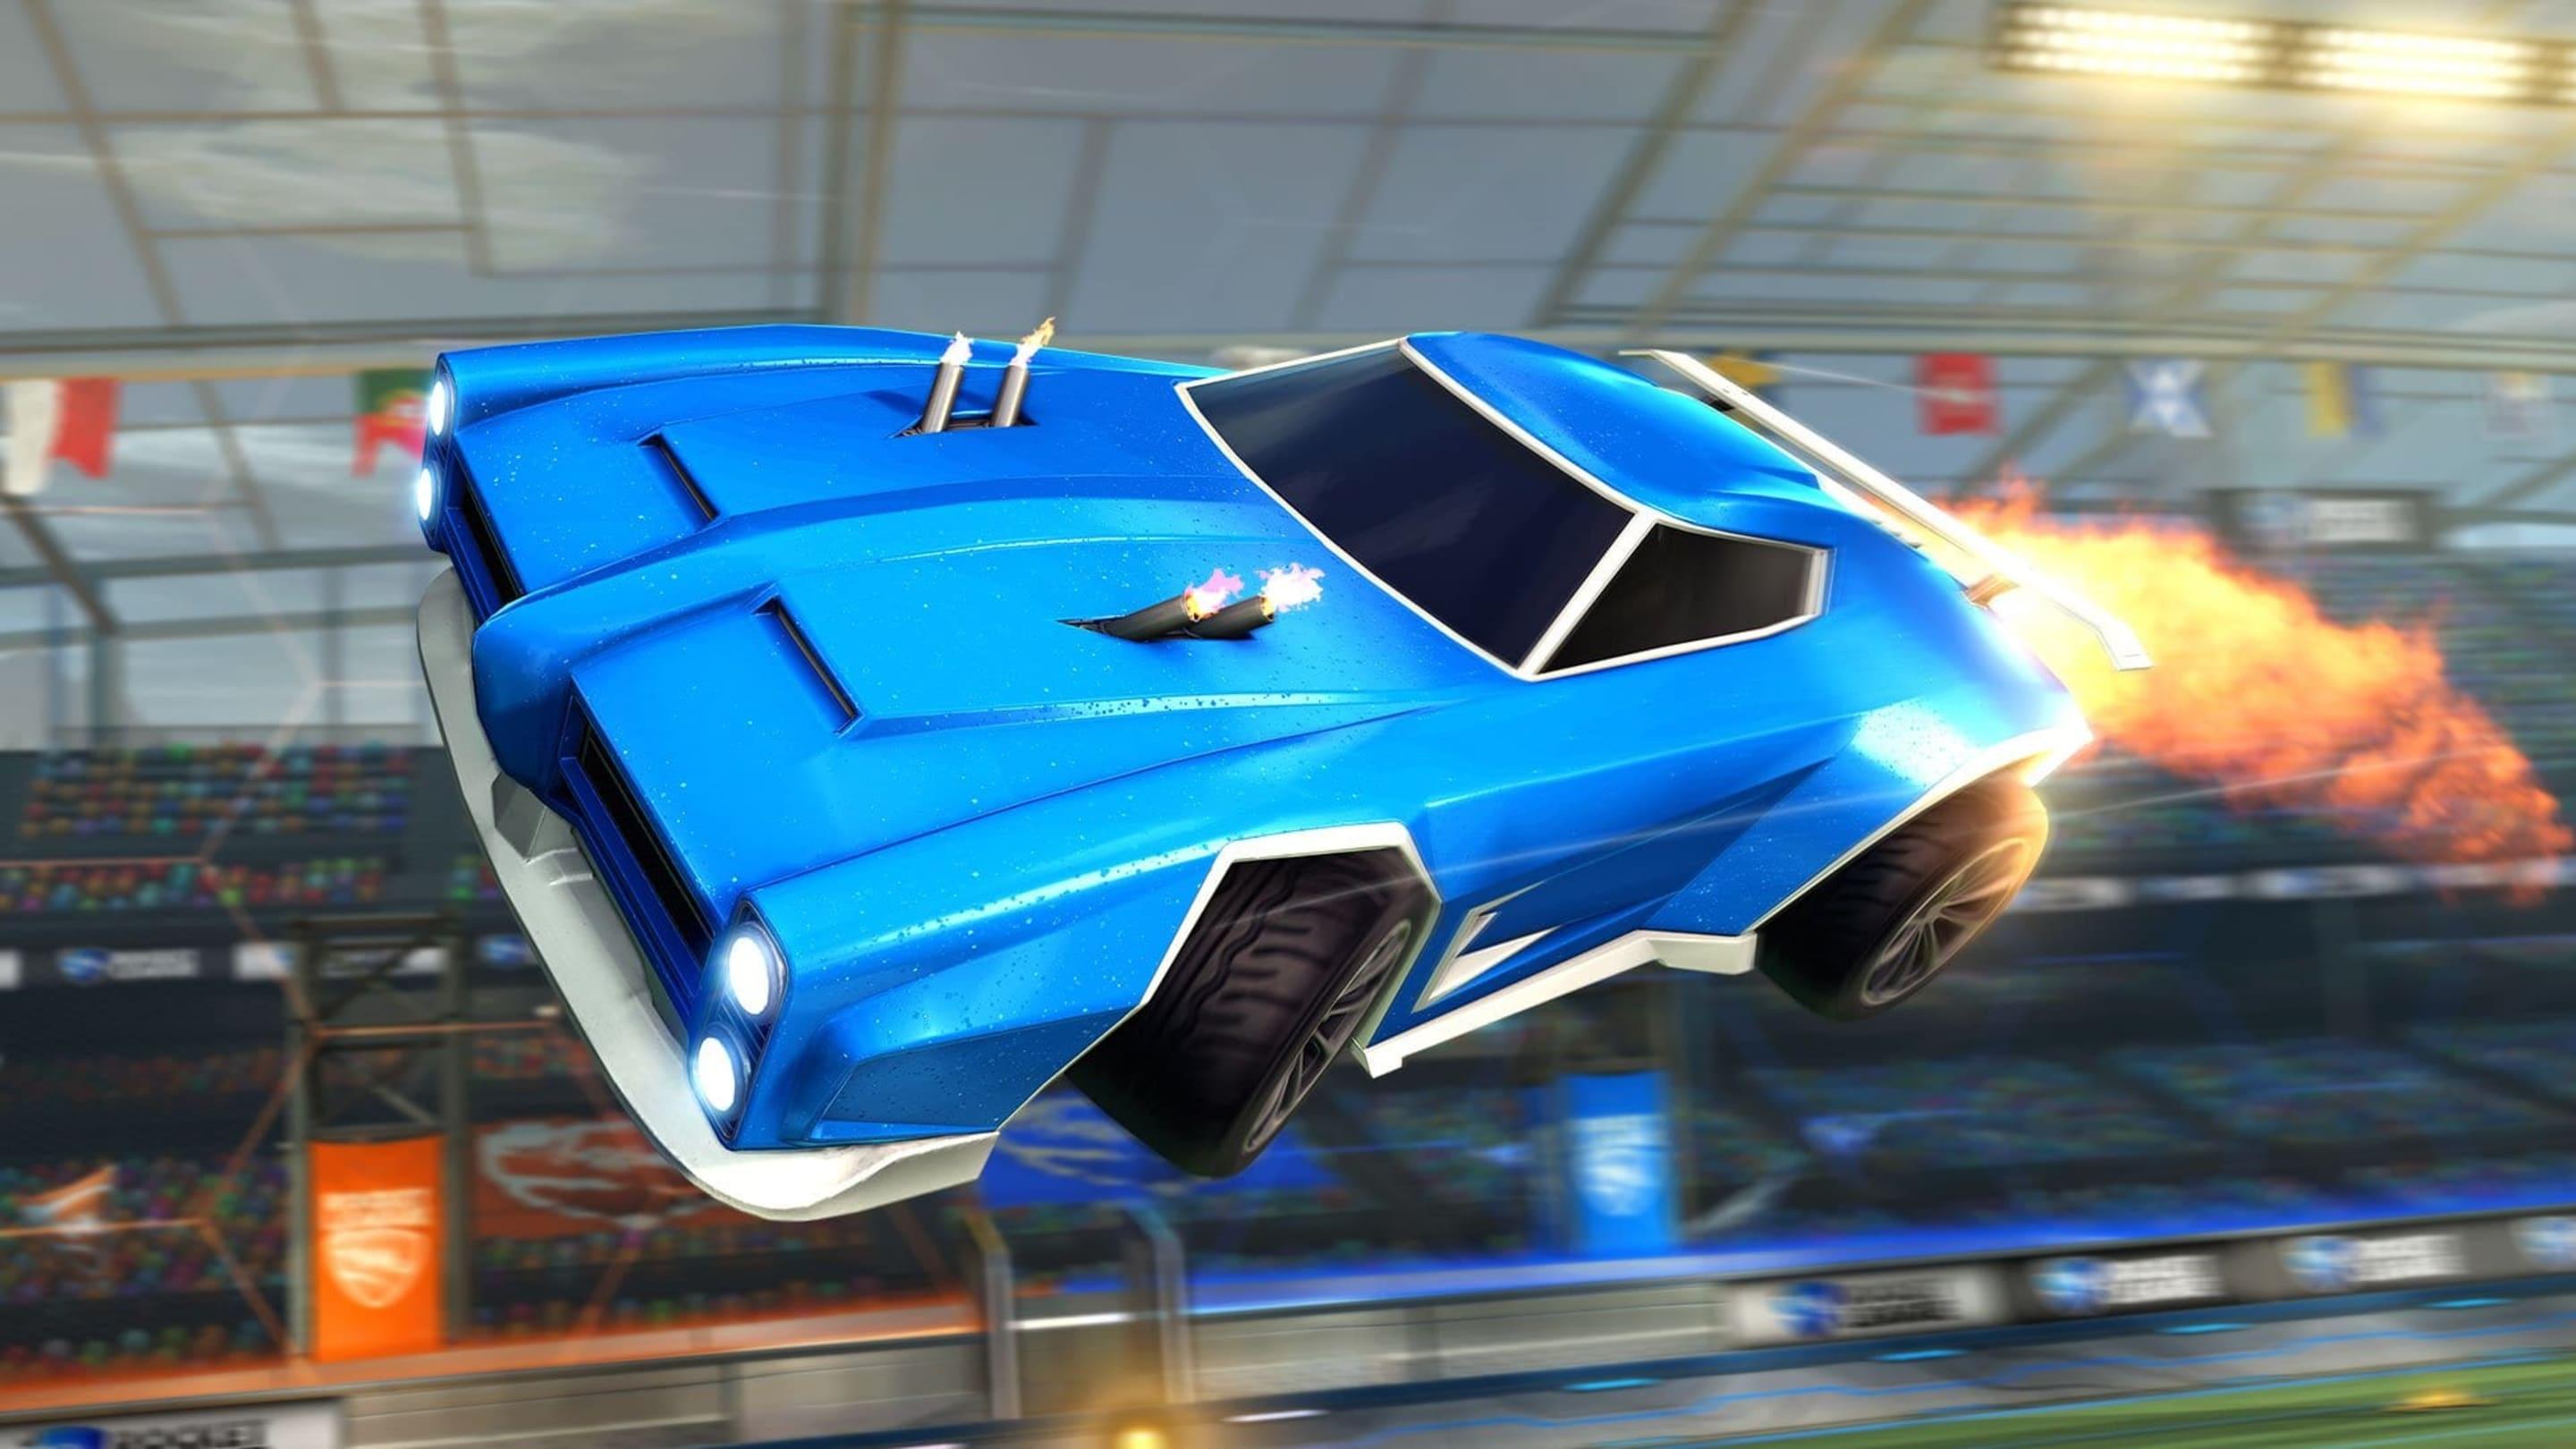 Why is Dominus so expensive?